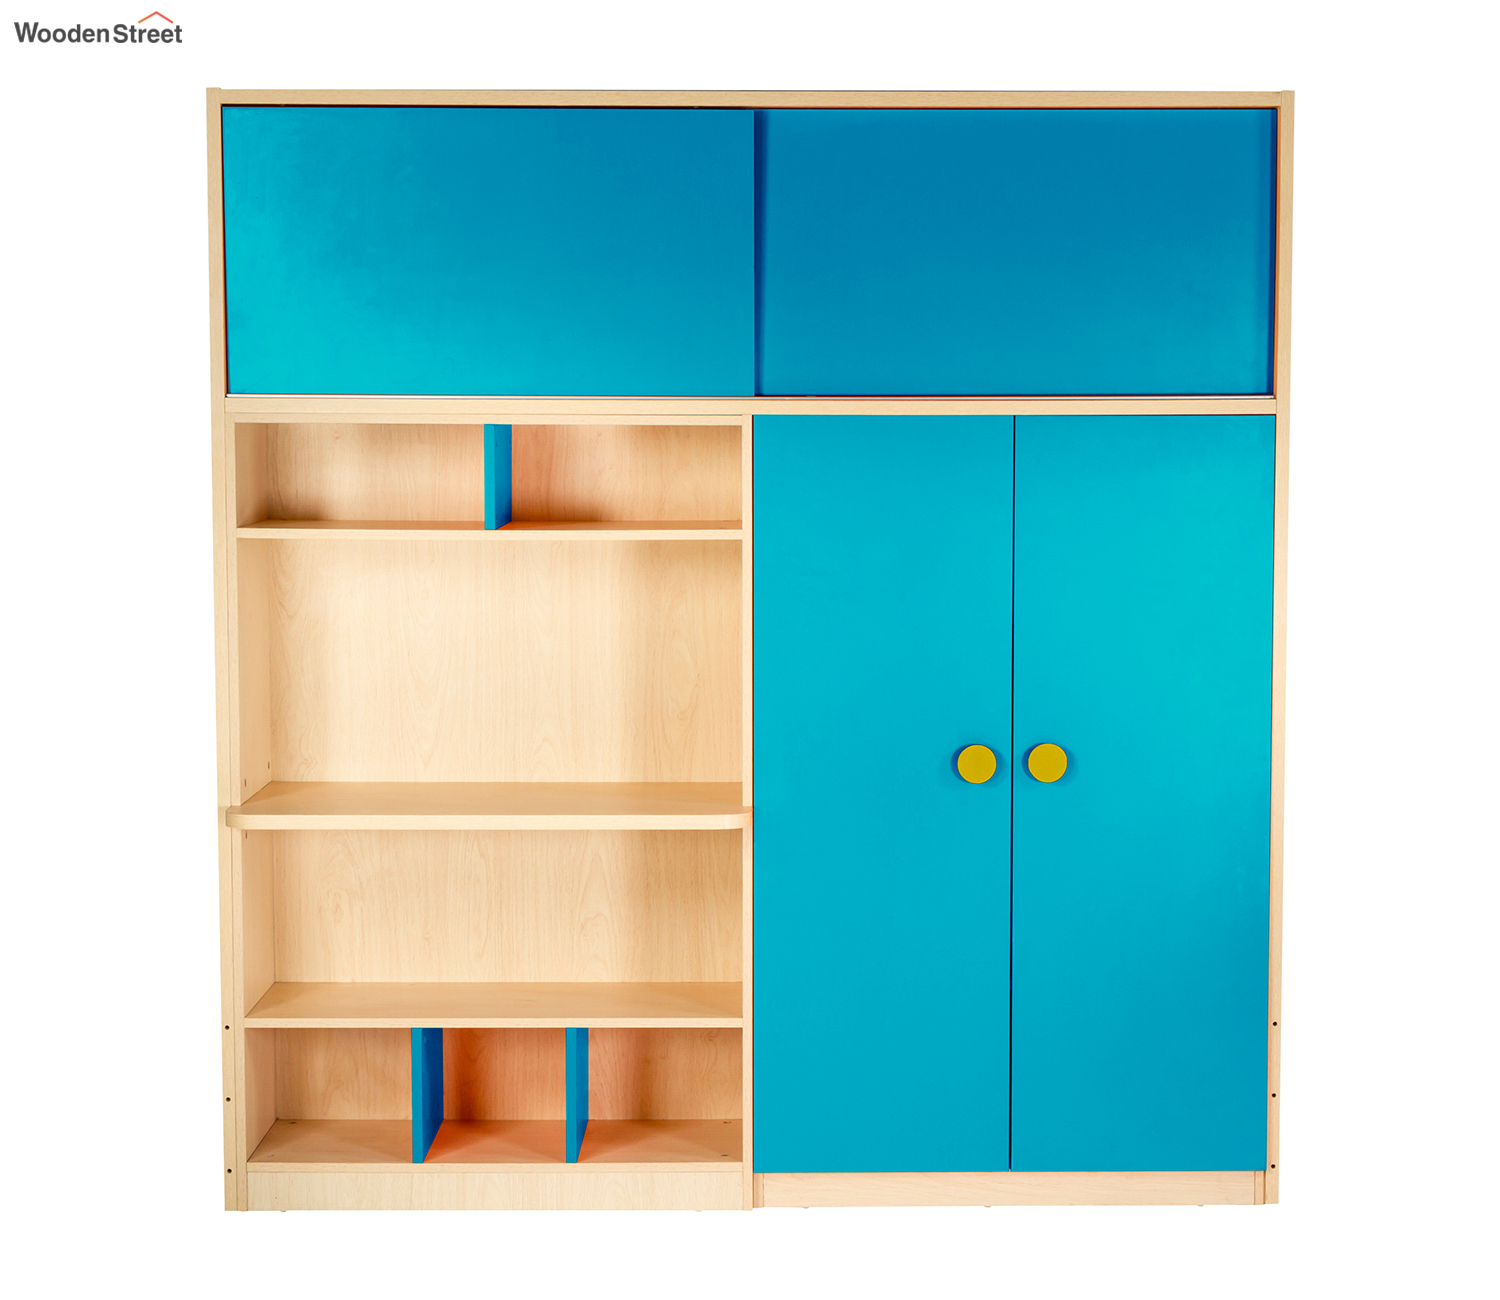 Organize Your Child's Room with Wooden Street's Kid's Wardrobes!